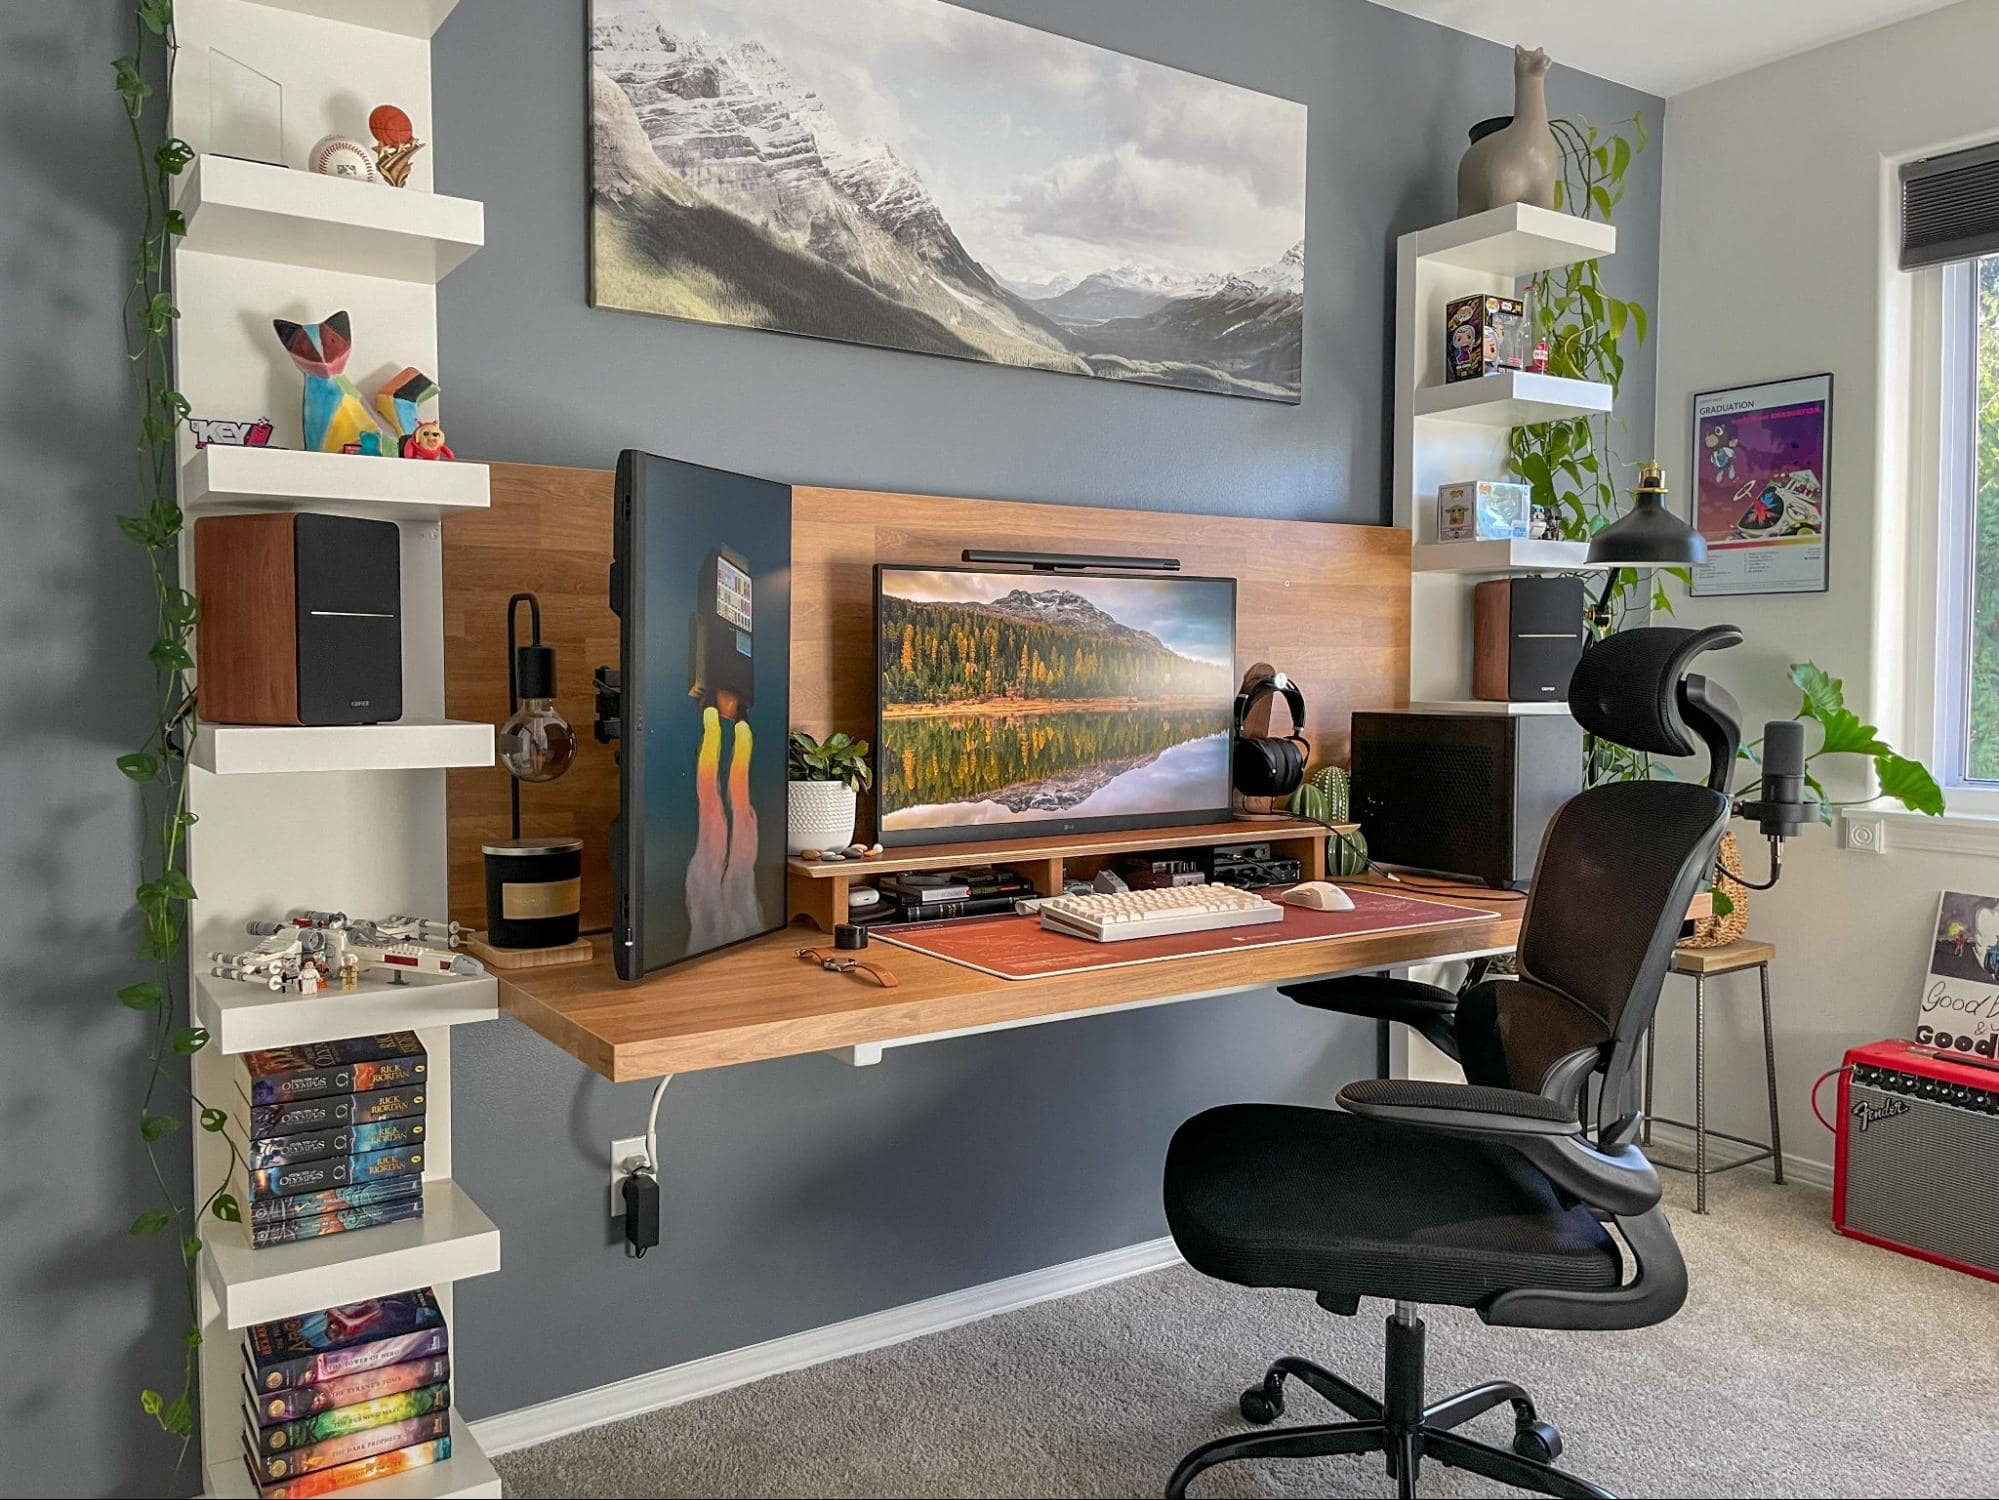 A spacious home office with an ergonomic chair, wooden floating desk with monitors, surrounded by shelving with plants and decor, and a guitar amplifier in the corner, under ambient lighting